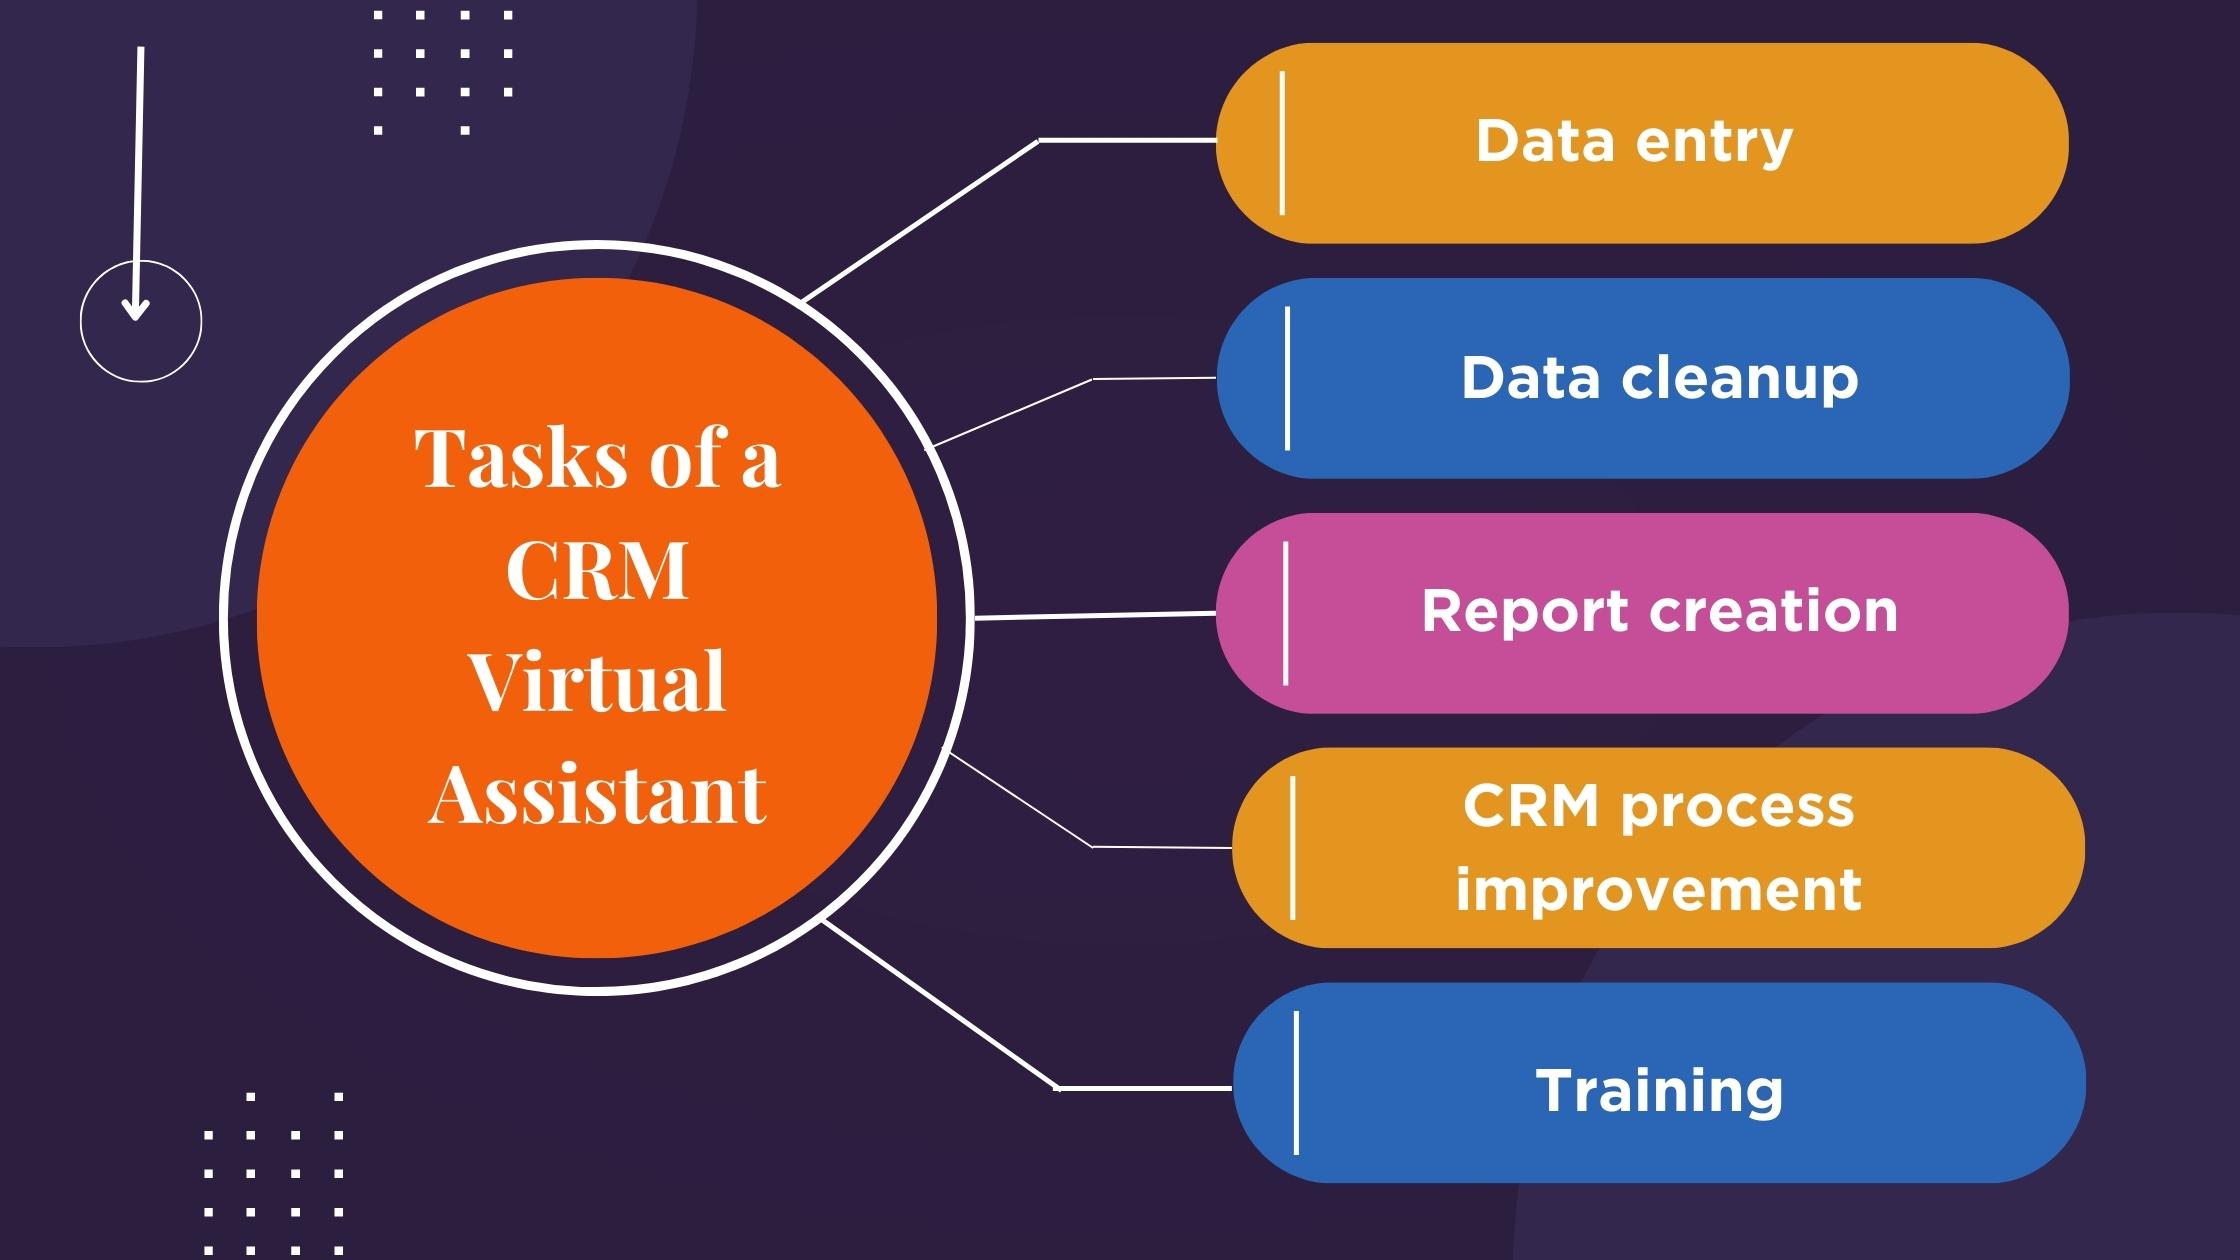 Tasks of CRM Virtual Assistant